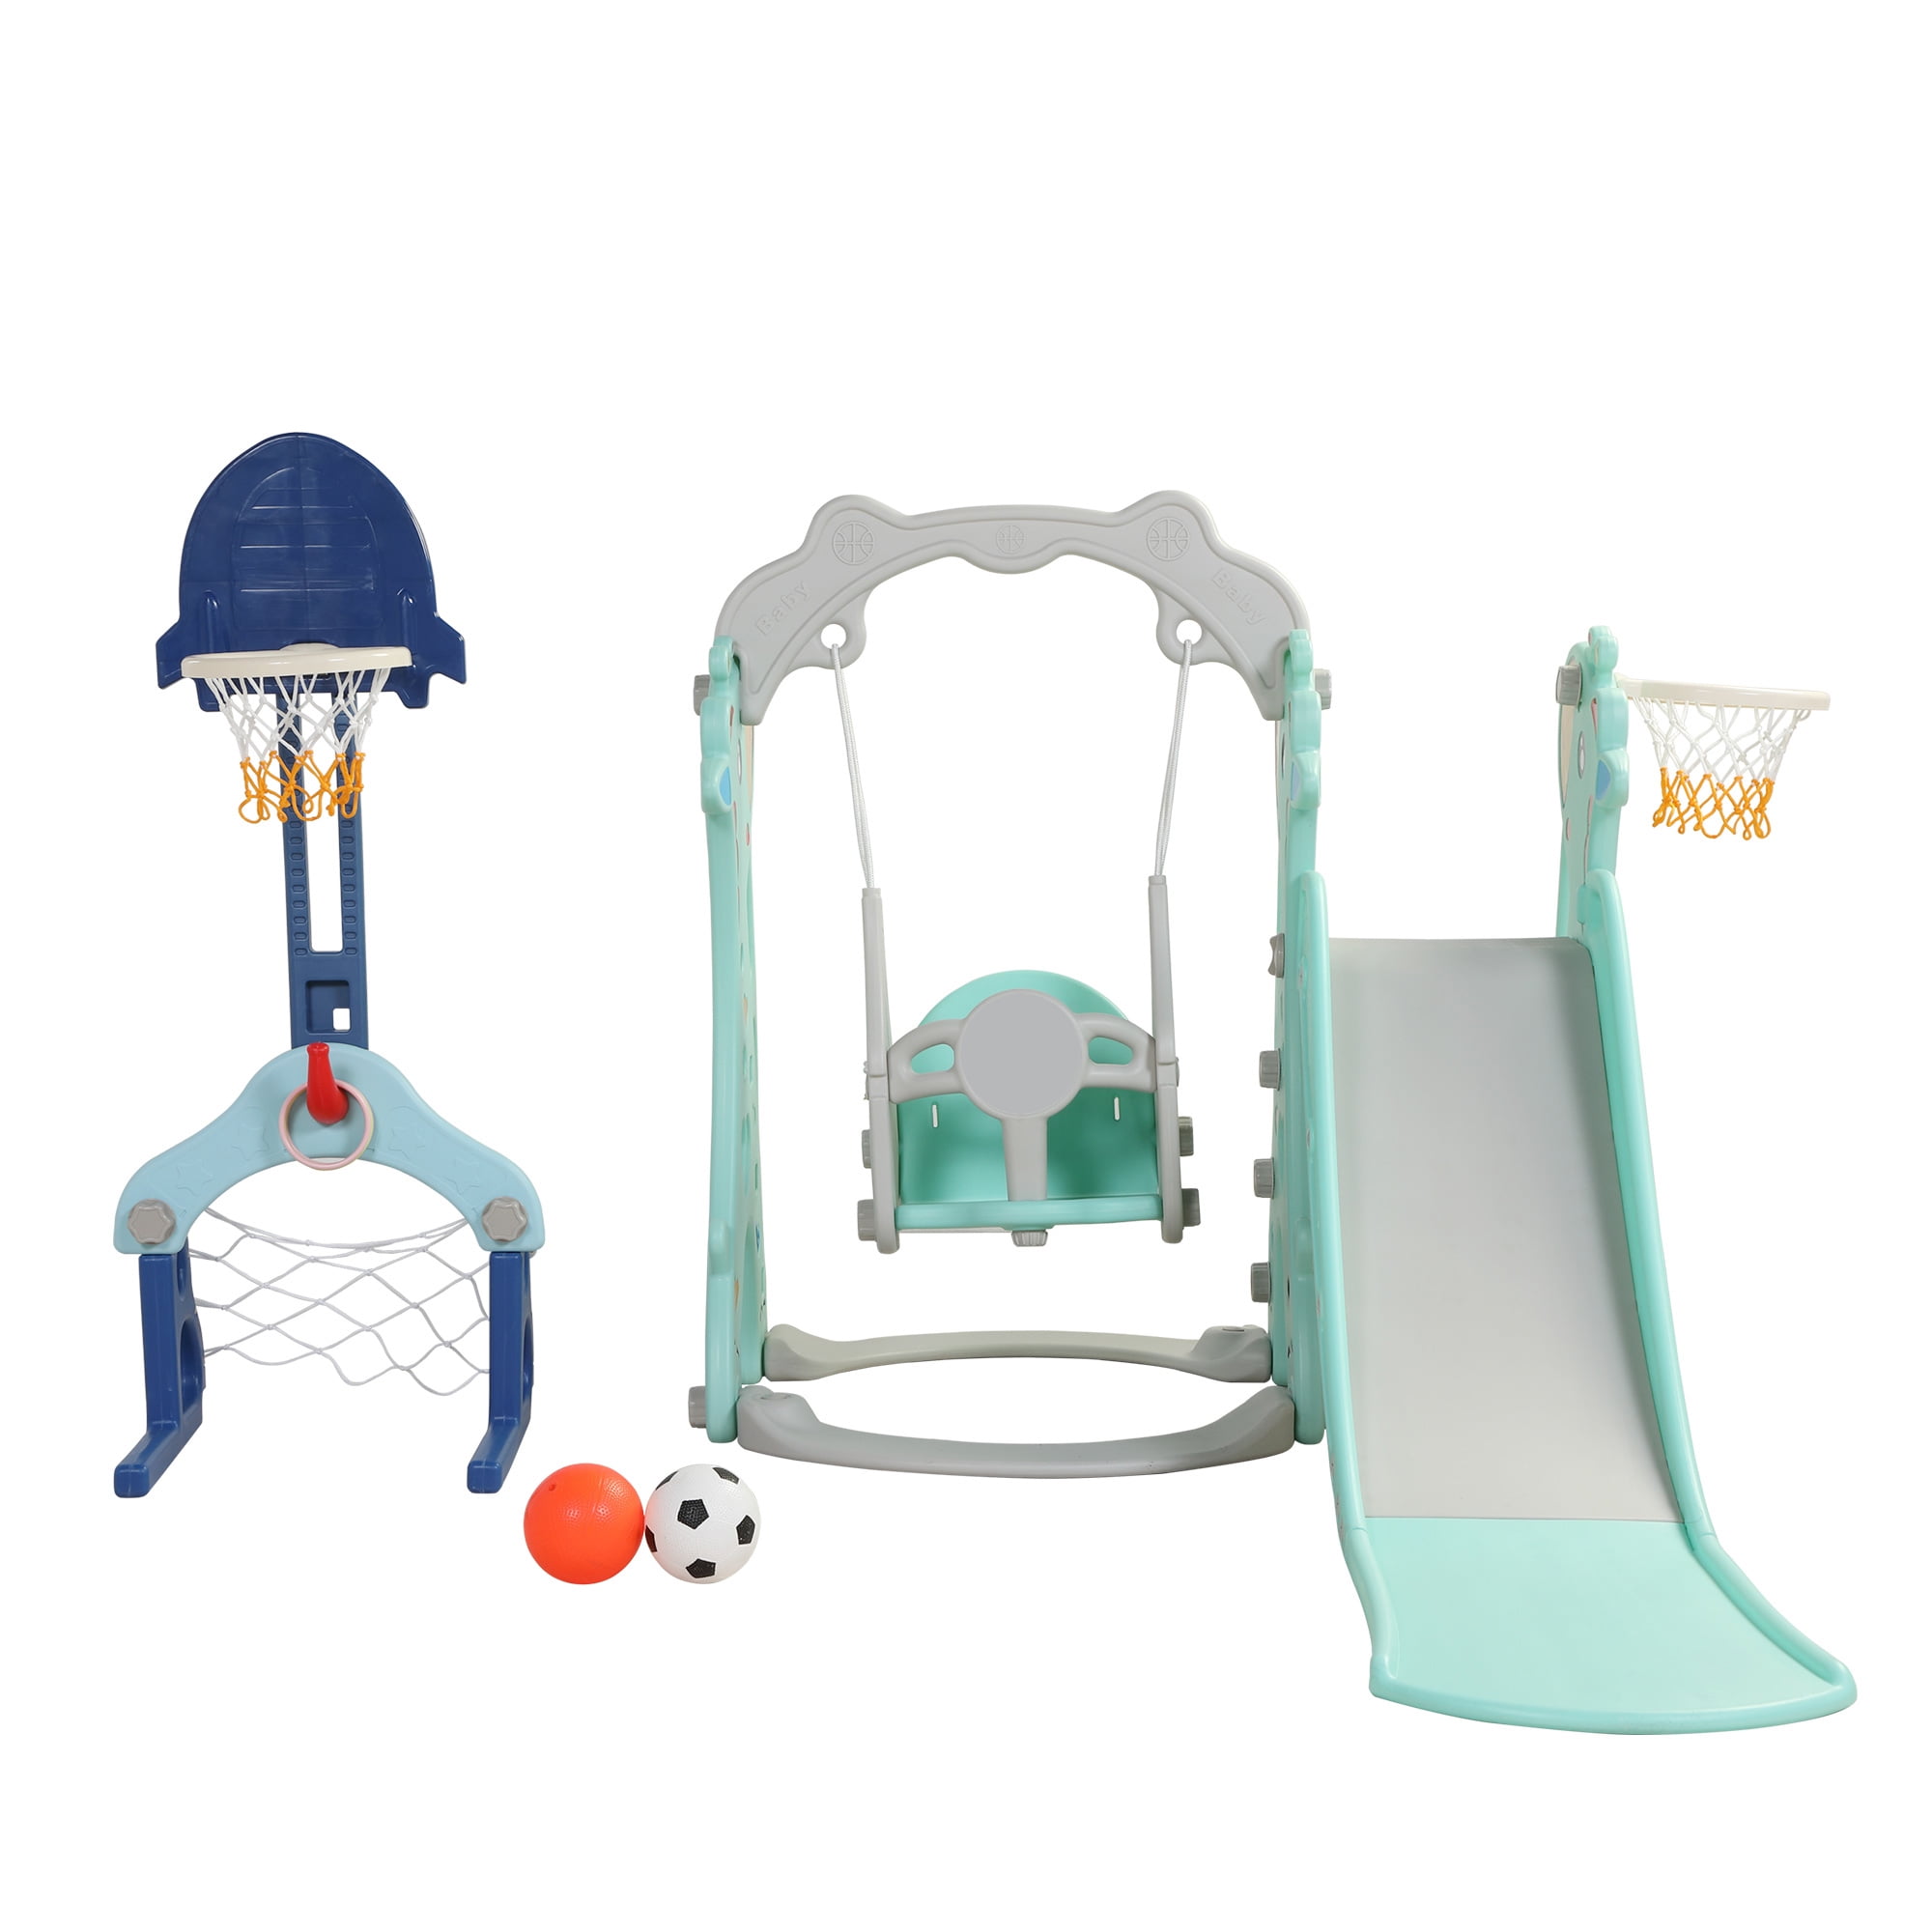 Baby Freestanding Slide Set for Indoor Outdoor Backyard Multi-color Playset with Basketball Hoop and Extra Long Slide Wildmont Toddler Slide and Swing Set 4 in 1 Kids Play Climber Slide Playground 